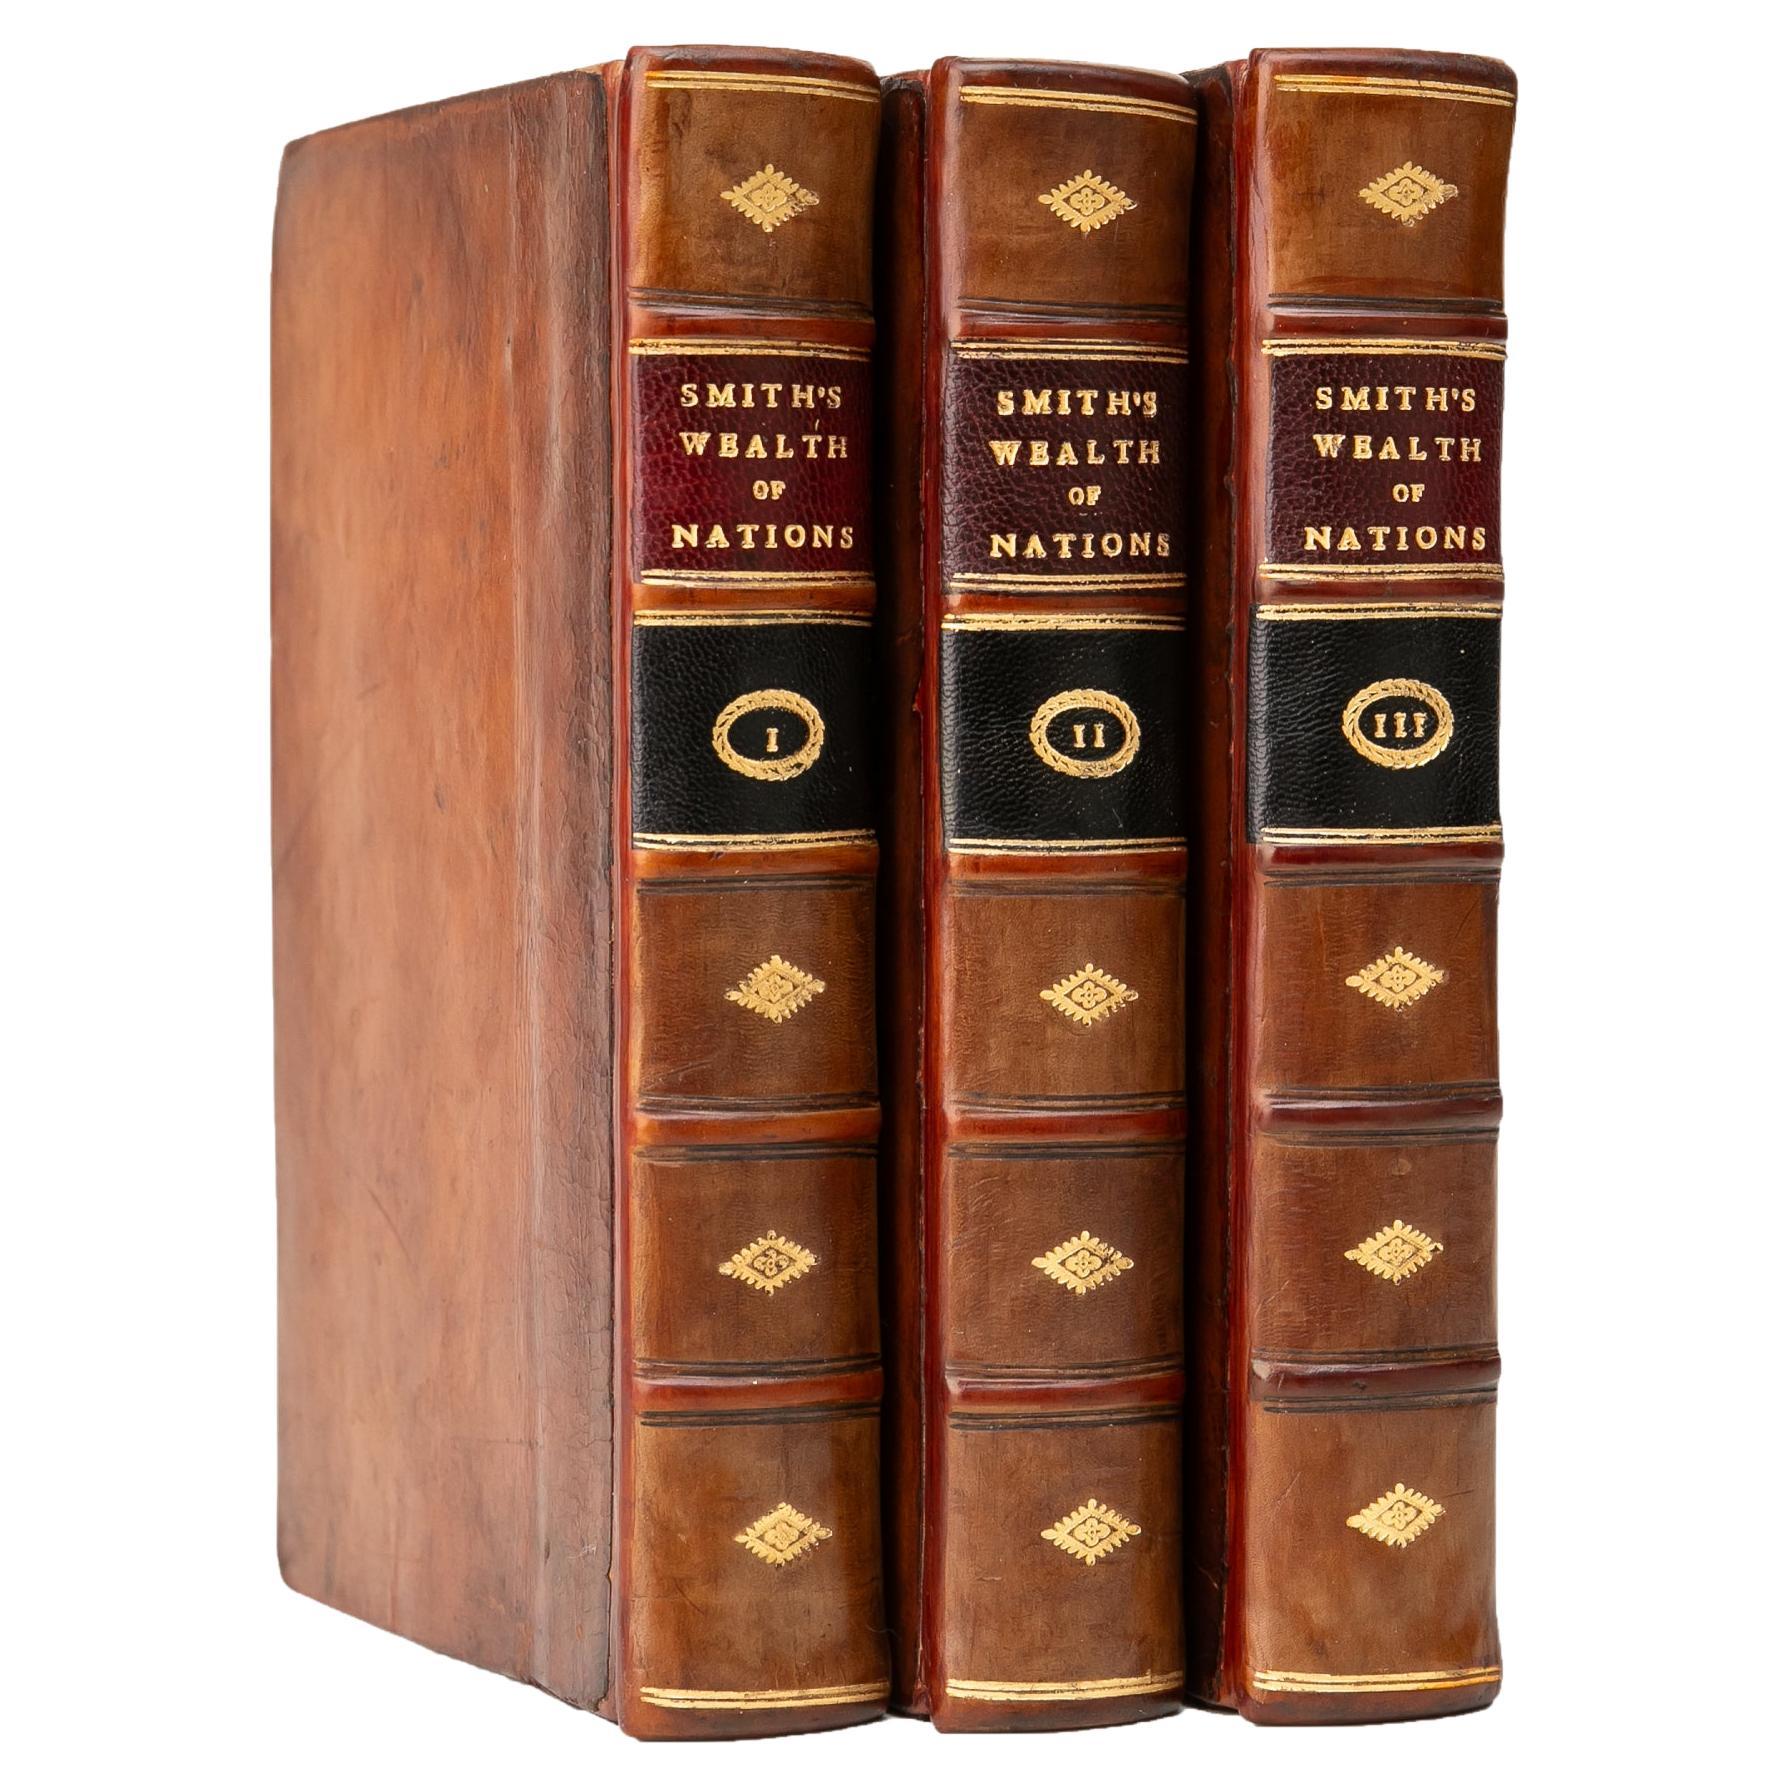 3 Volumes. Adam Smith, The Wealth of Nations. For Sale